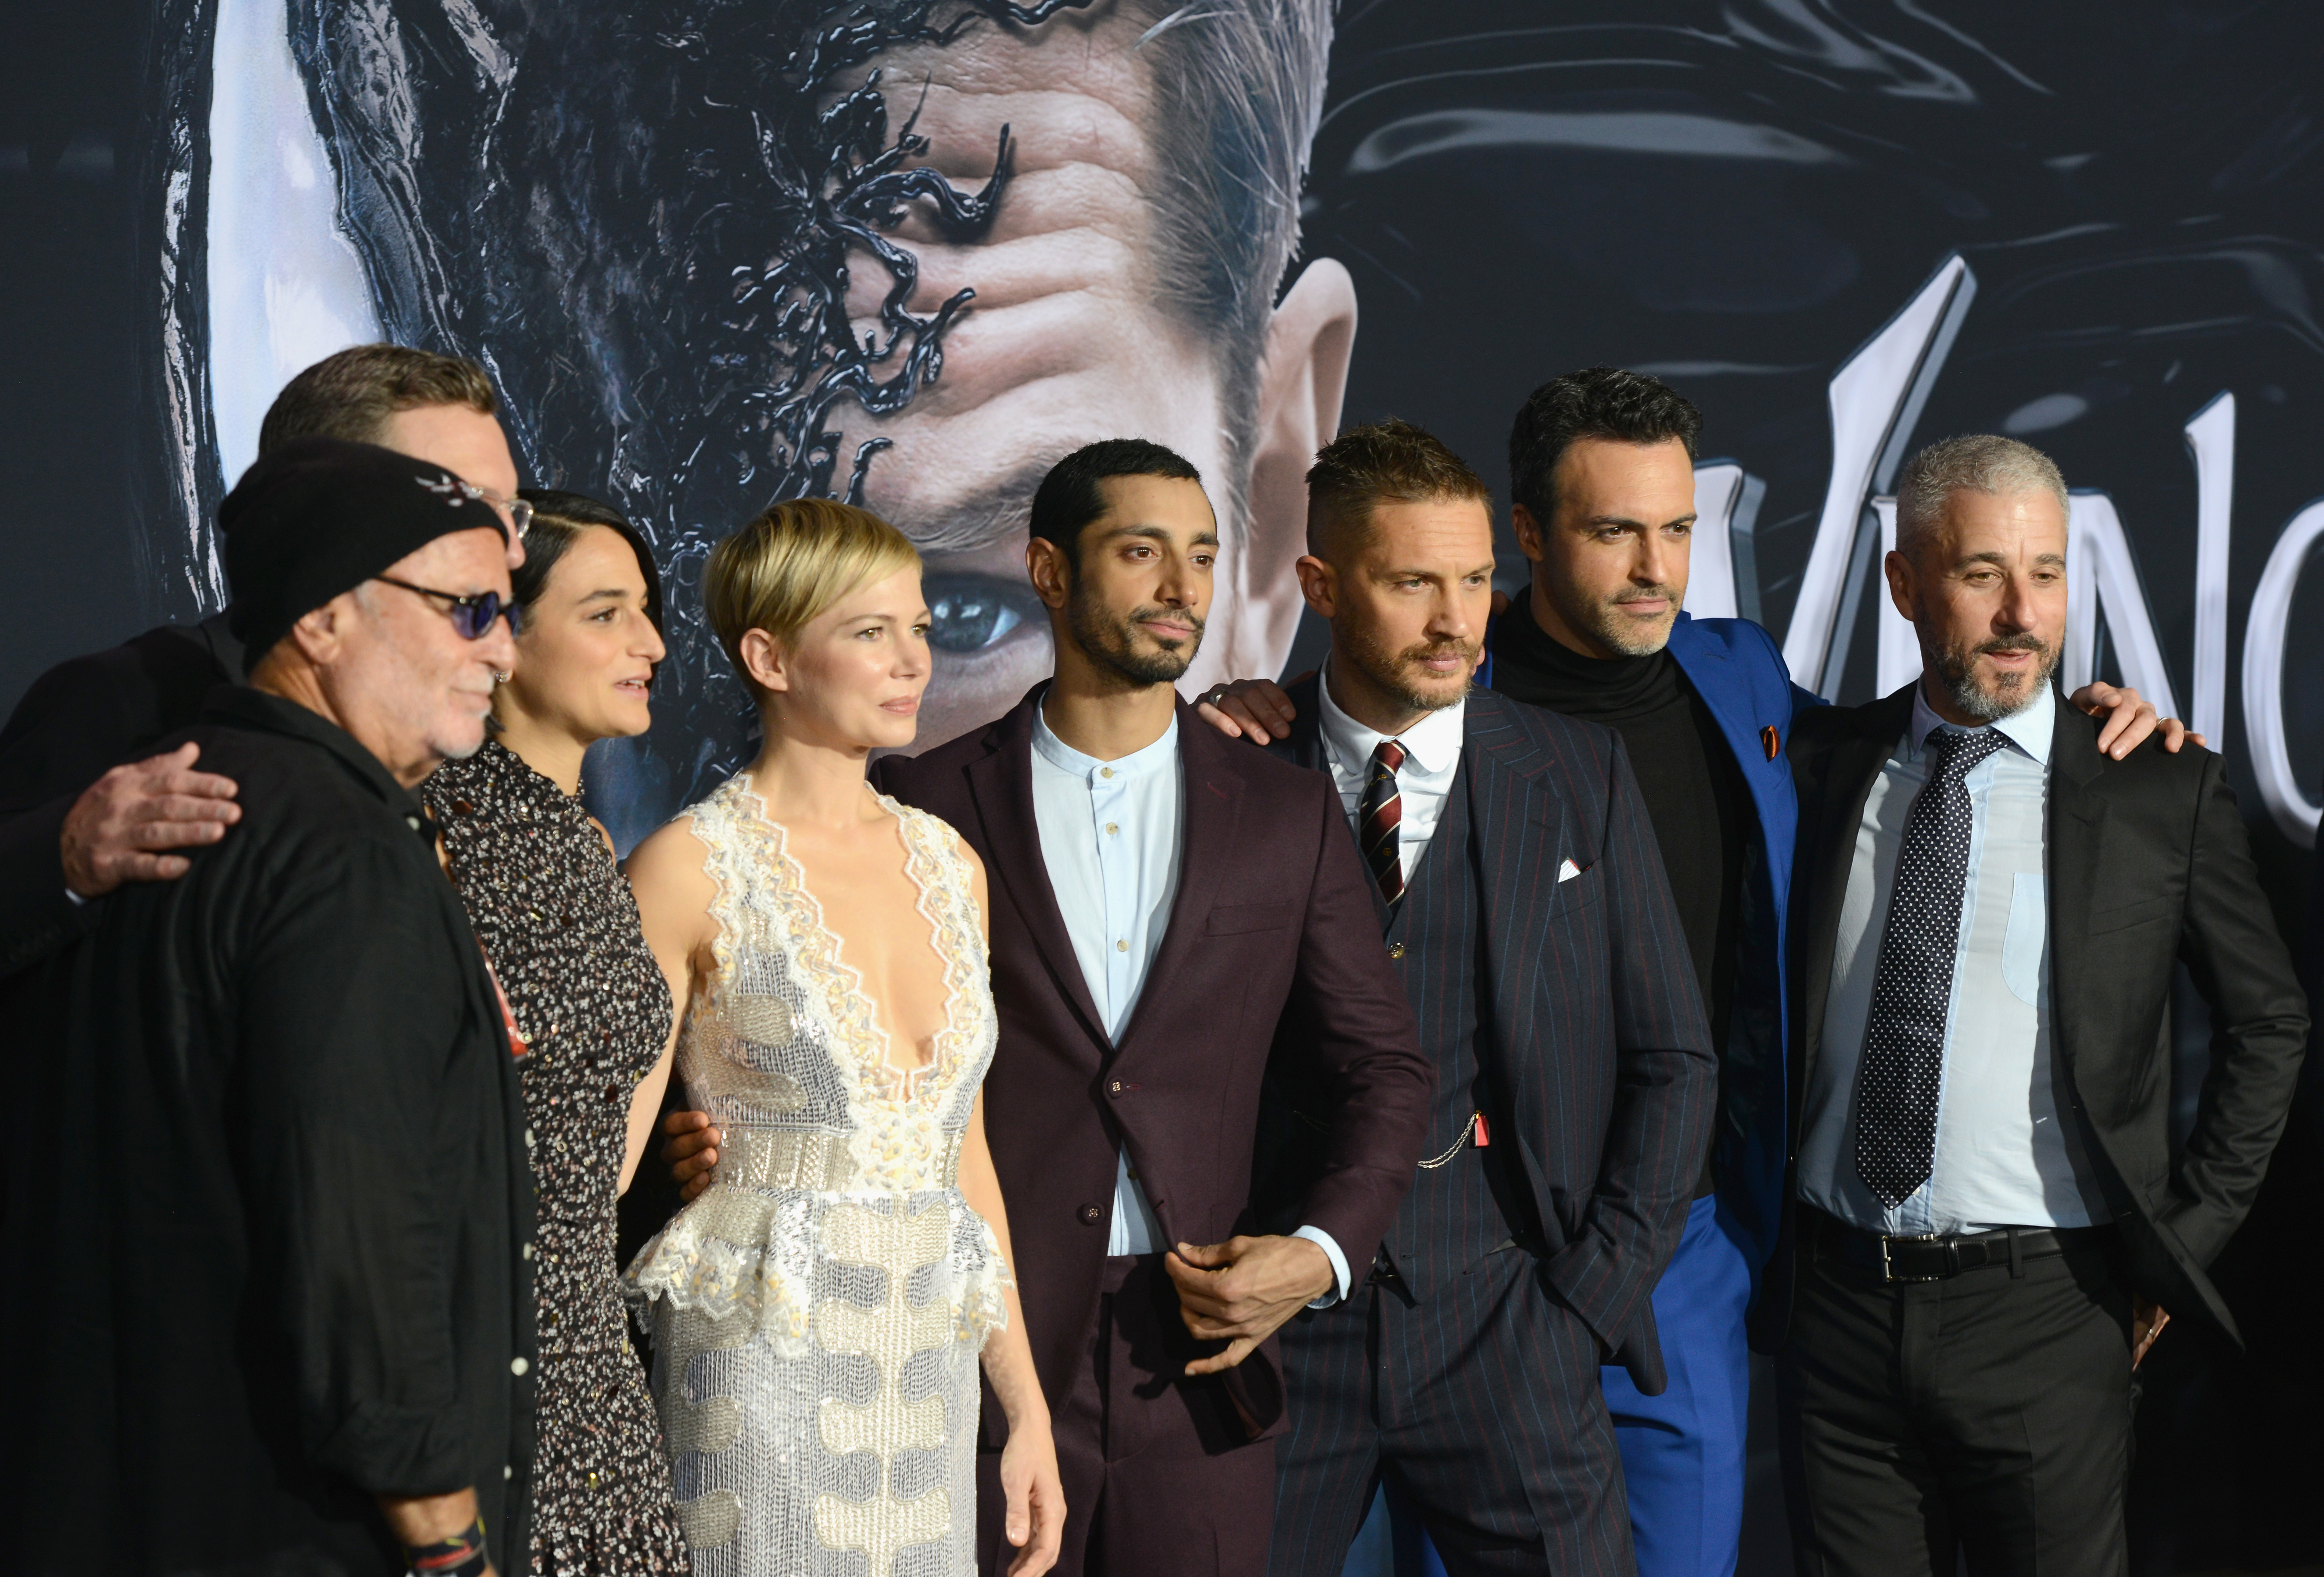 Venom cast members, including Tom Hardy, Riz Ahmed, and Michelle Williams, standing together at a media event